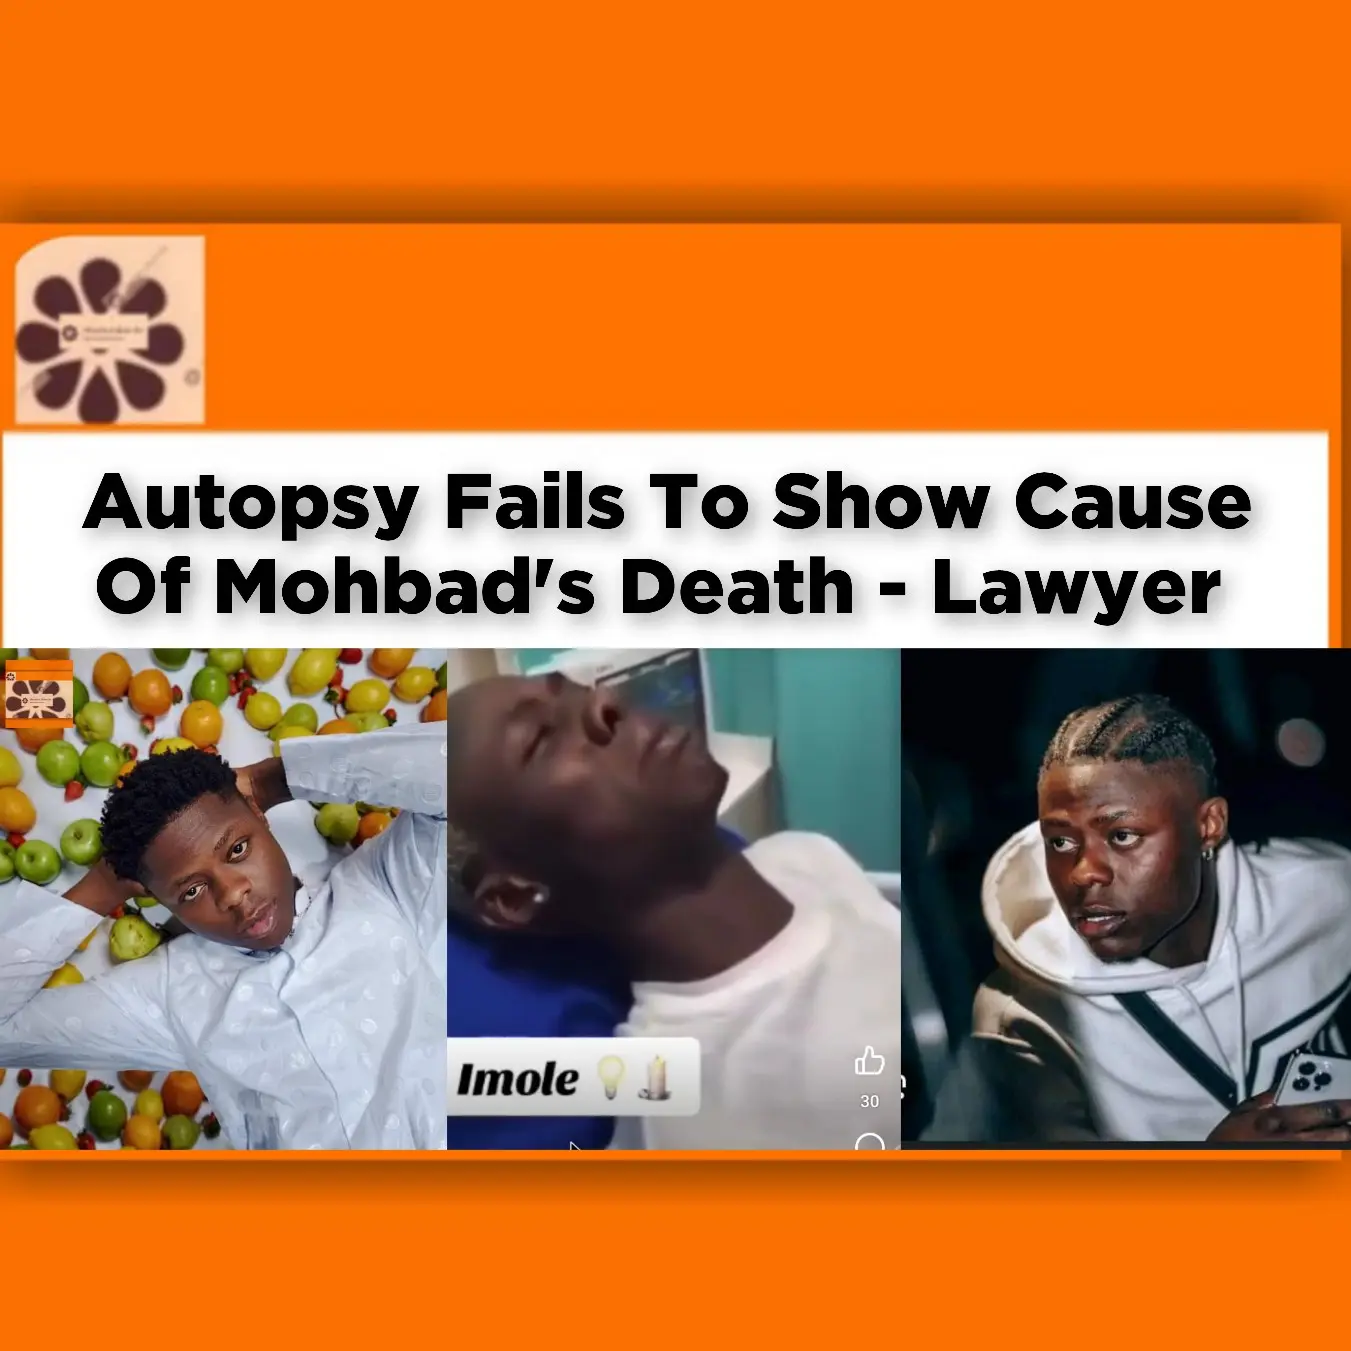 Autopsy Fails To Show Cause Of Mohbad's Death - Lawyer ~ OsazuwaAkonedo #Northeast